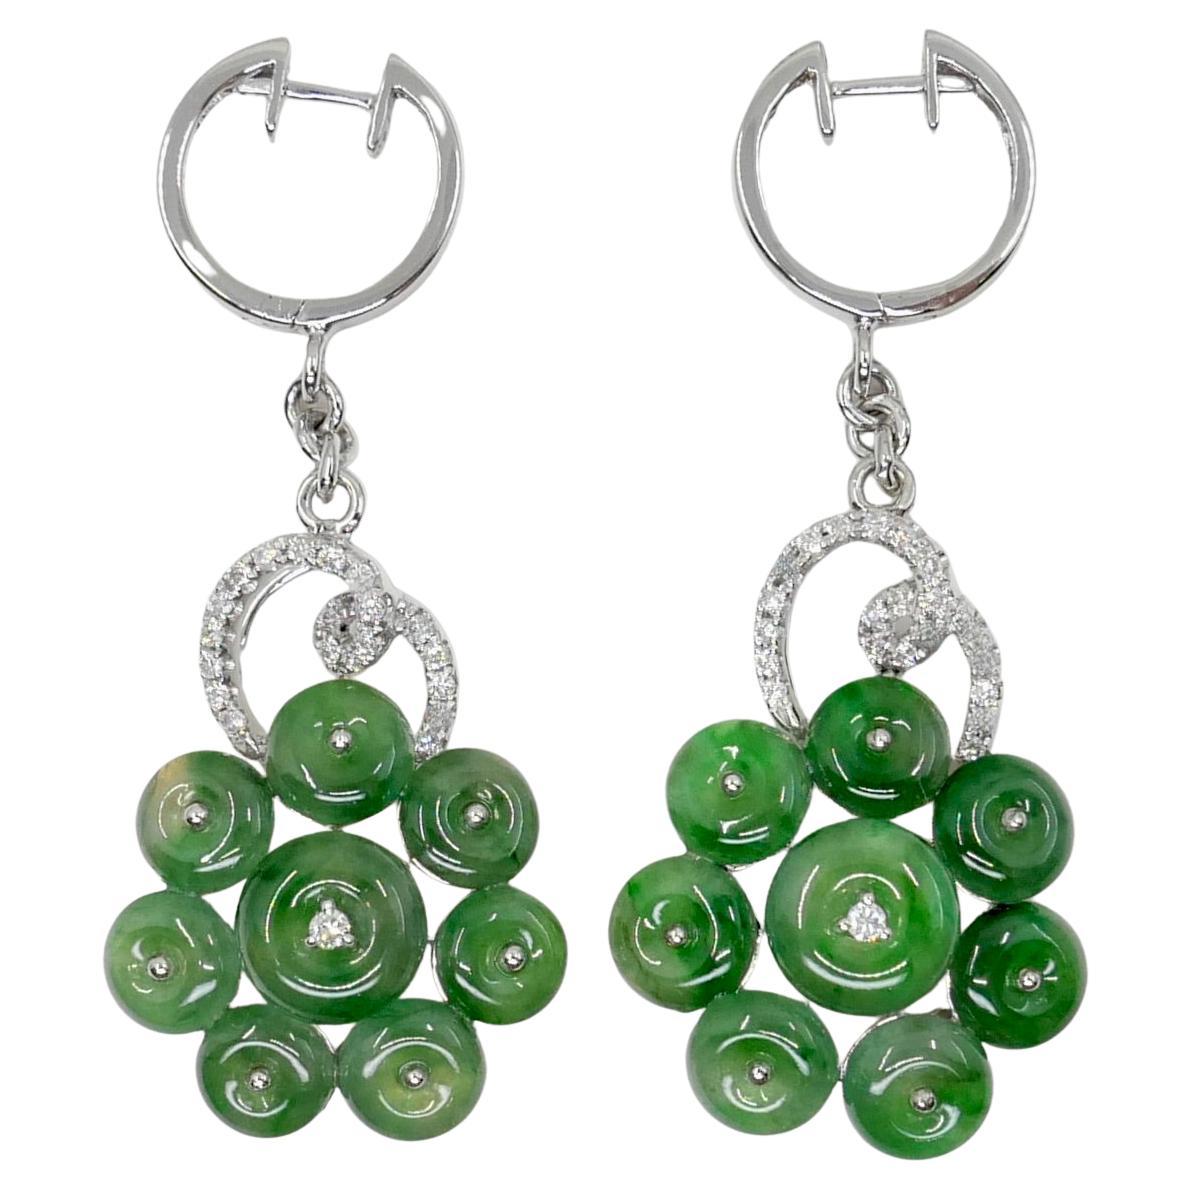 Certified Type A Cluster Icy Jade Discs & Diamond Earrings, High Translucency For Sale